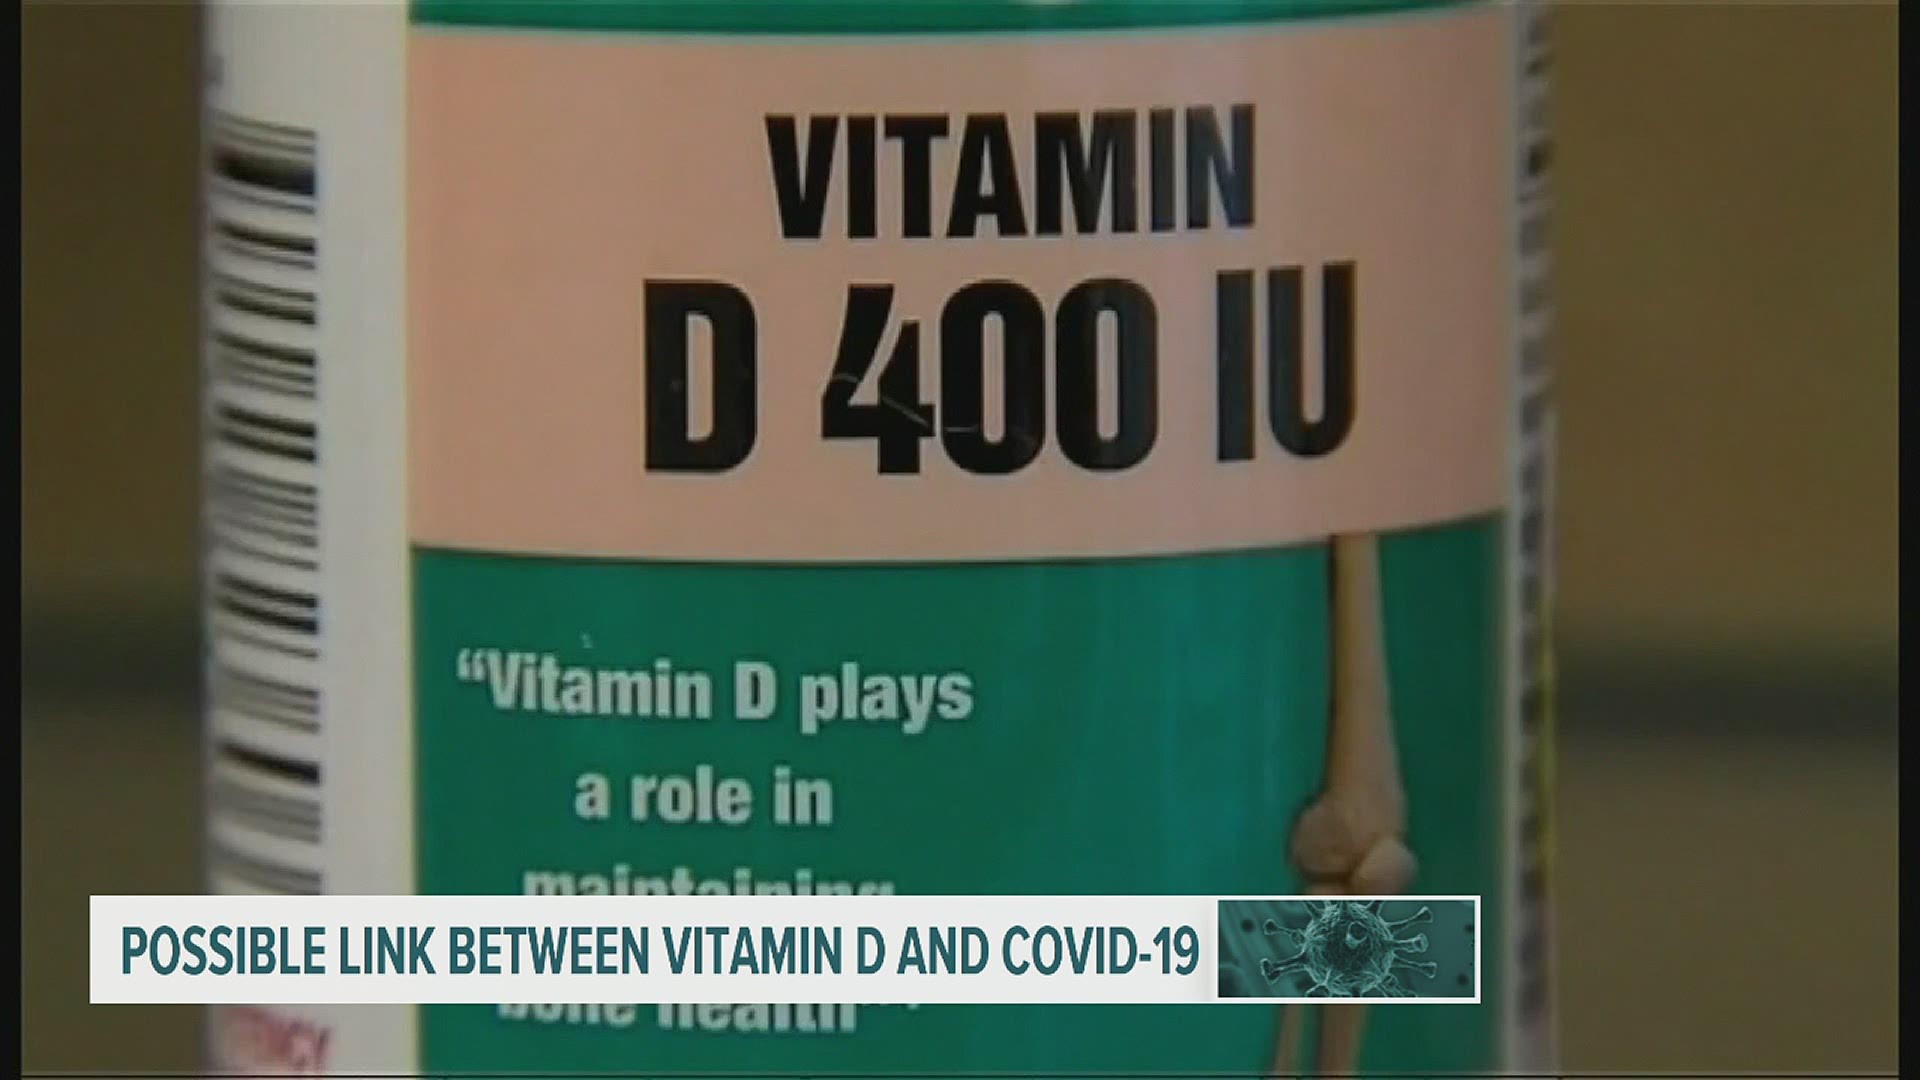 Brigham and Women's hospital is conducting nationwide study to prove Vitamin D's effectiveness related to COVID-19.